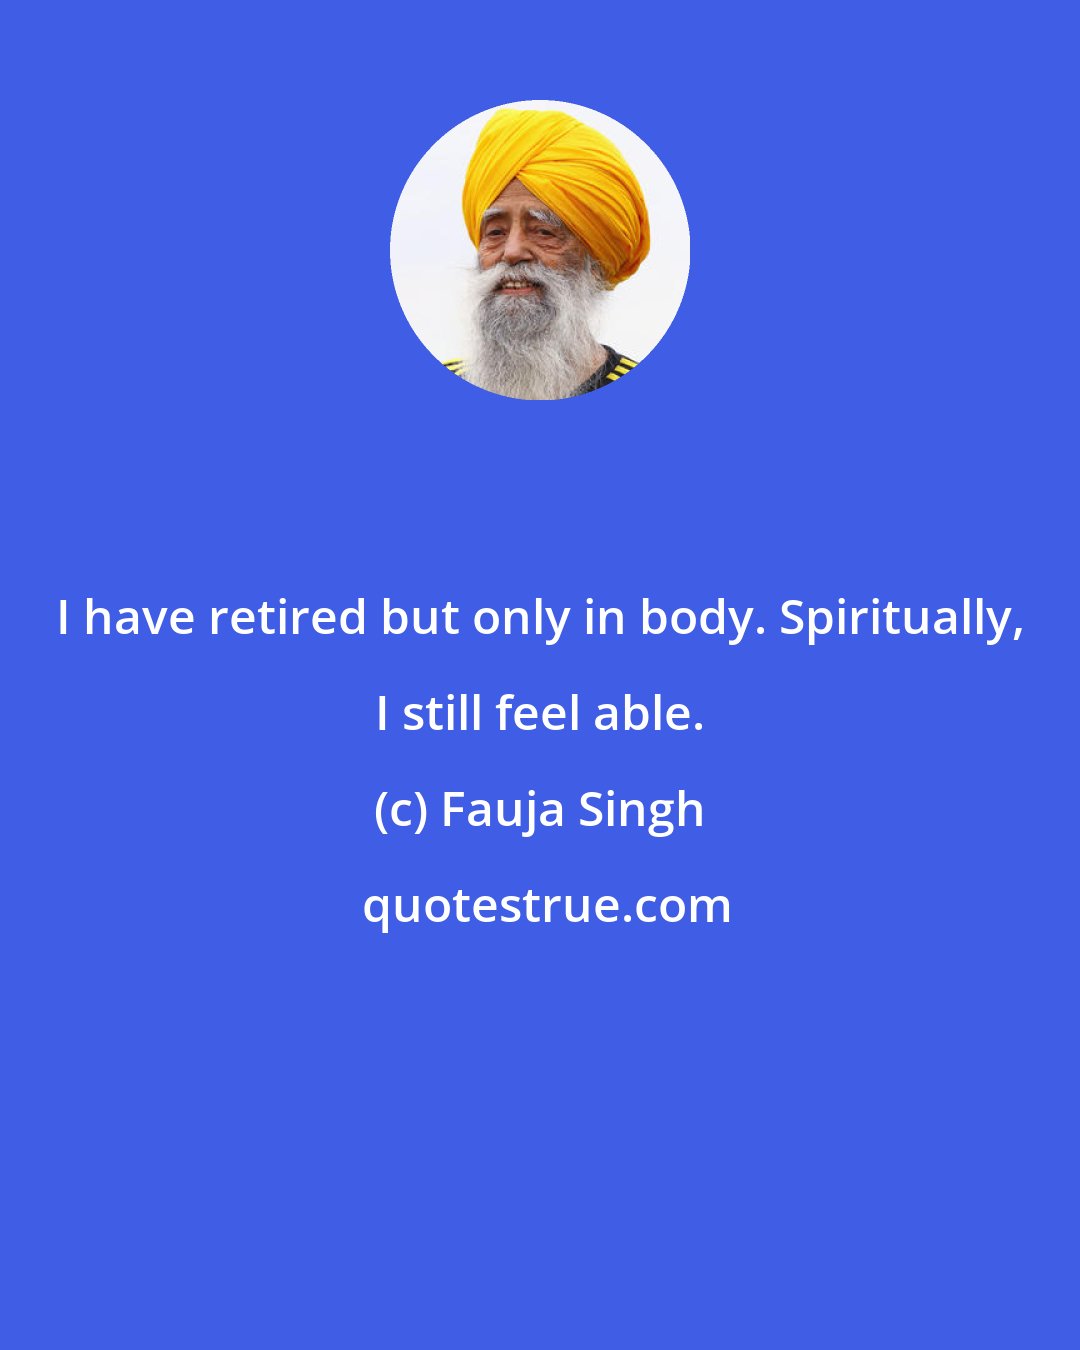 Fauja Singh: I have retired but only in body. Spiritually, I still feel able.